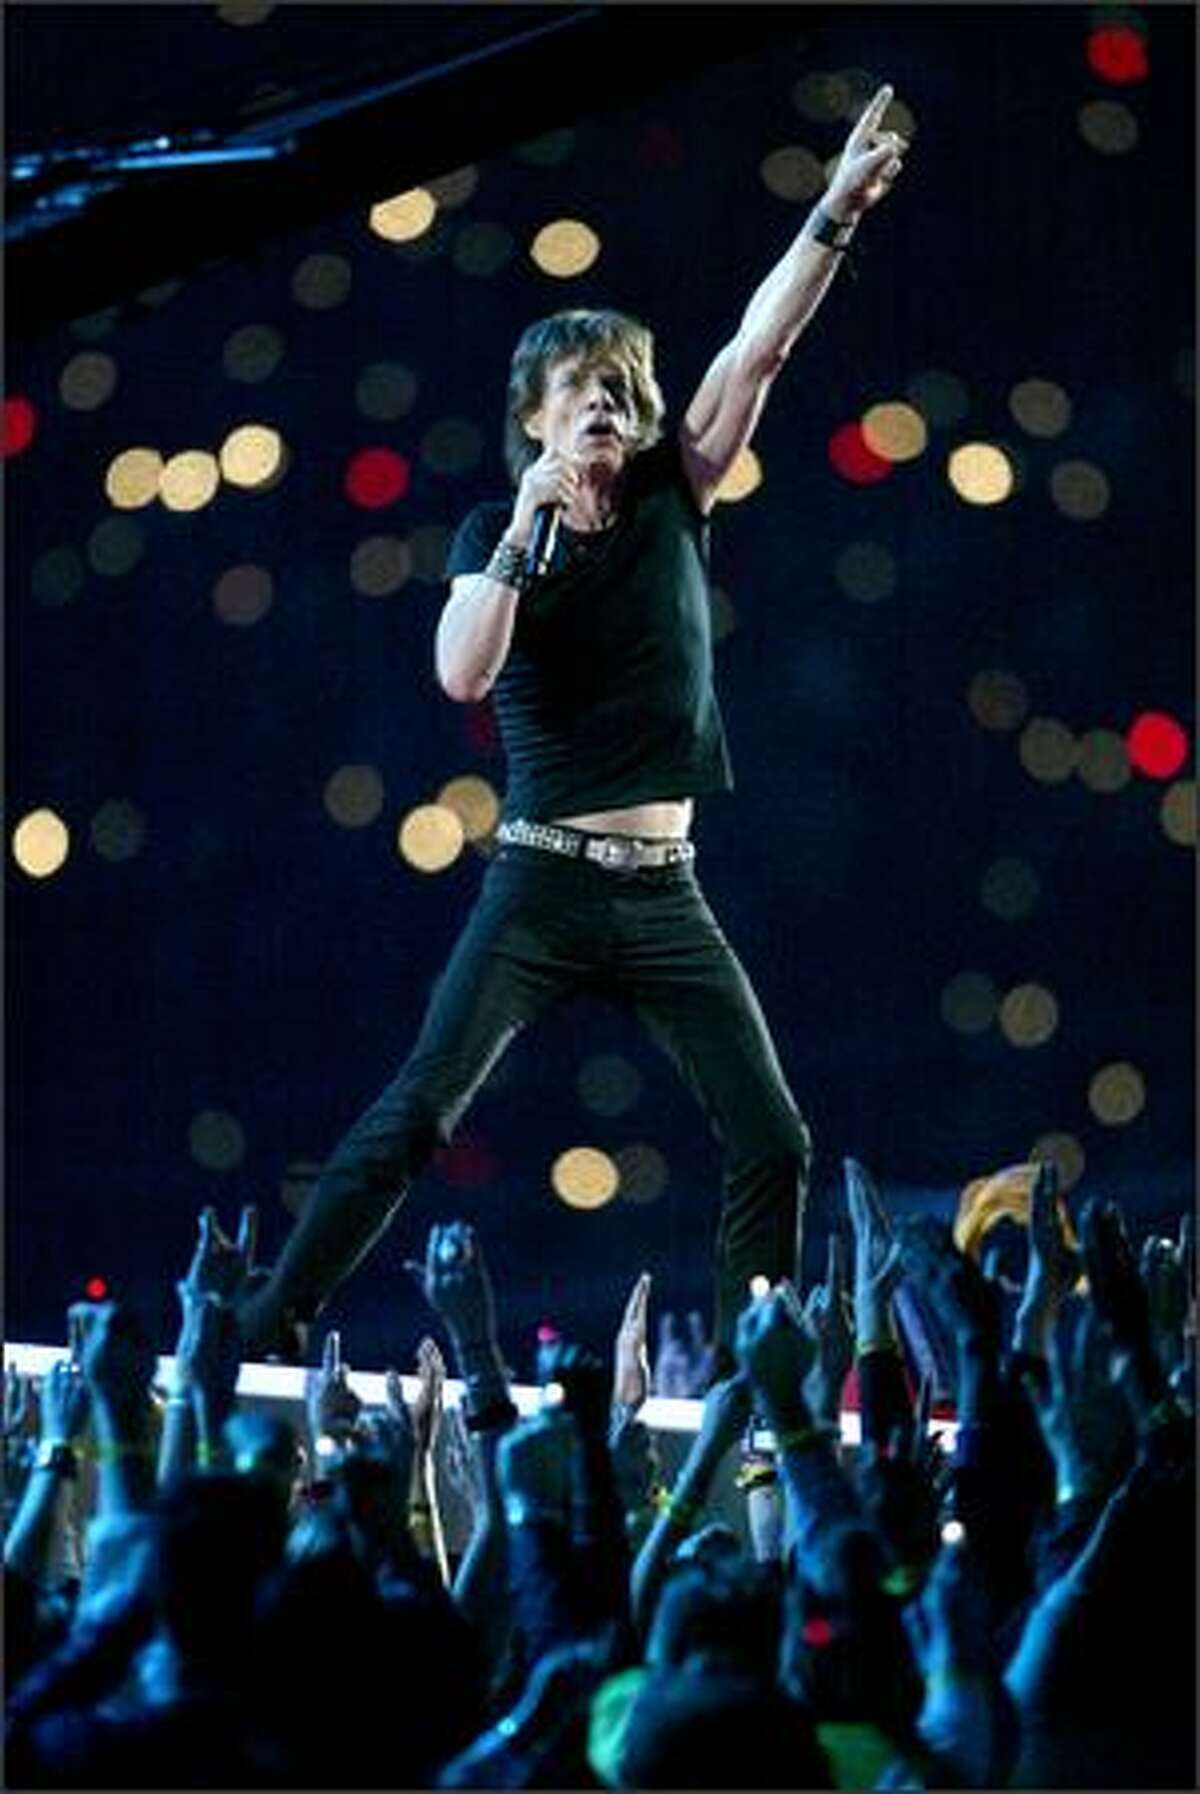 Rolling Stones singer Mick Jagger plays to the halftime crowd.